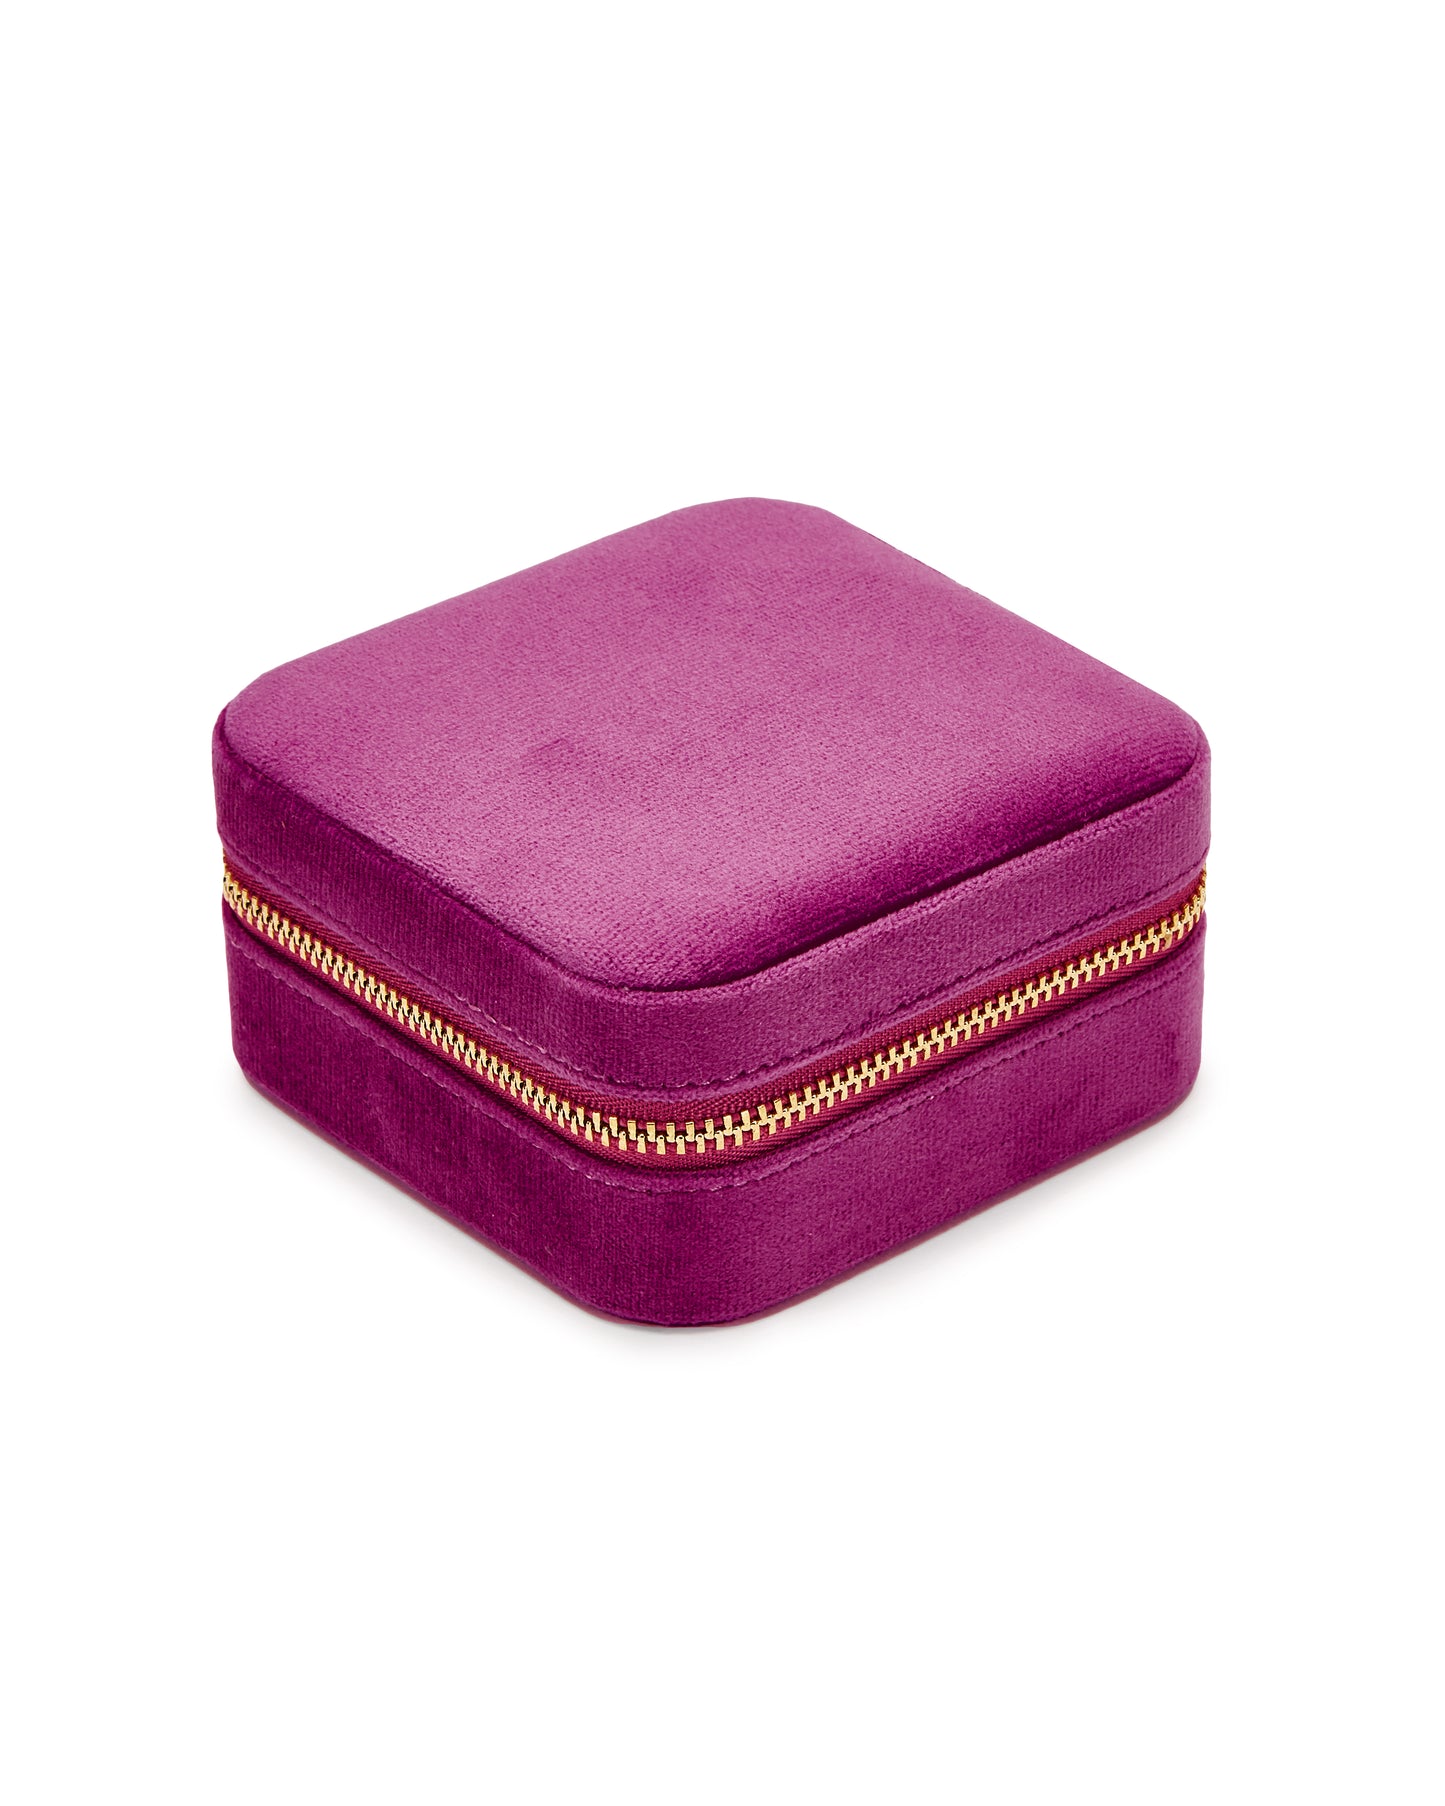 VELVET JEWELRY BOX col. wild berry, directly orderable - 5 pieces